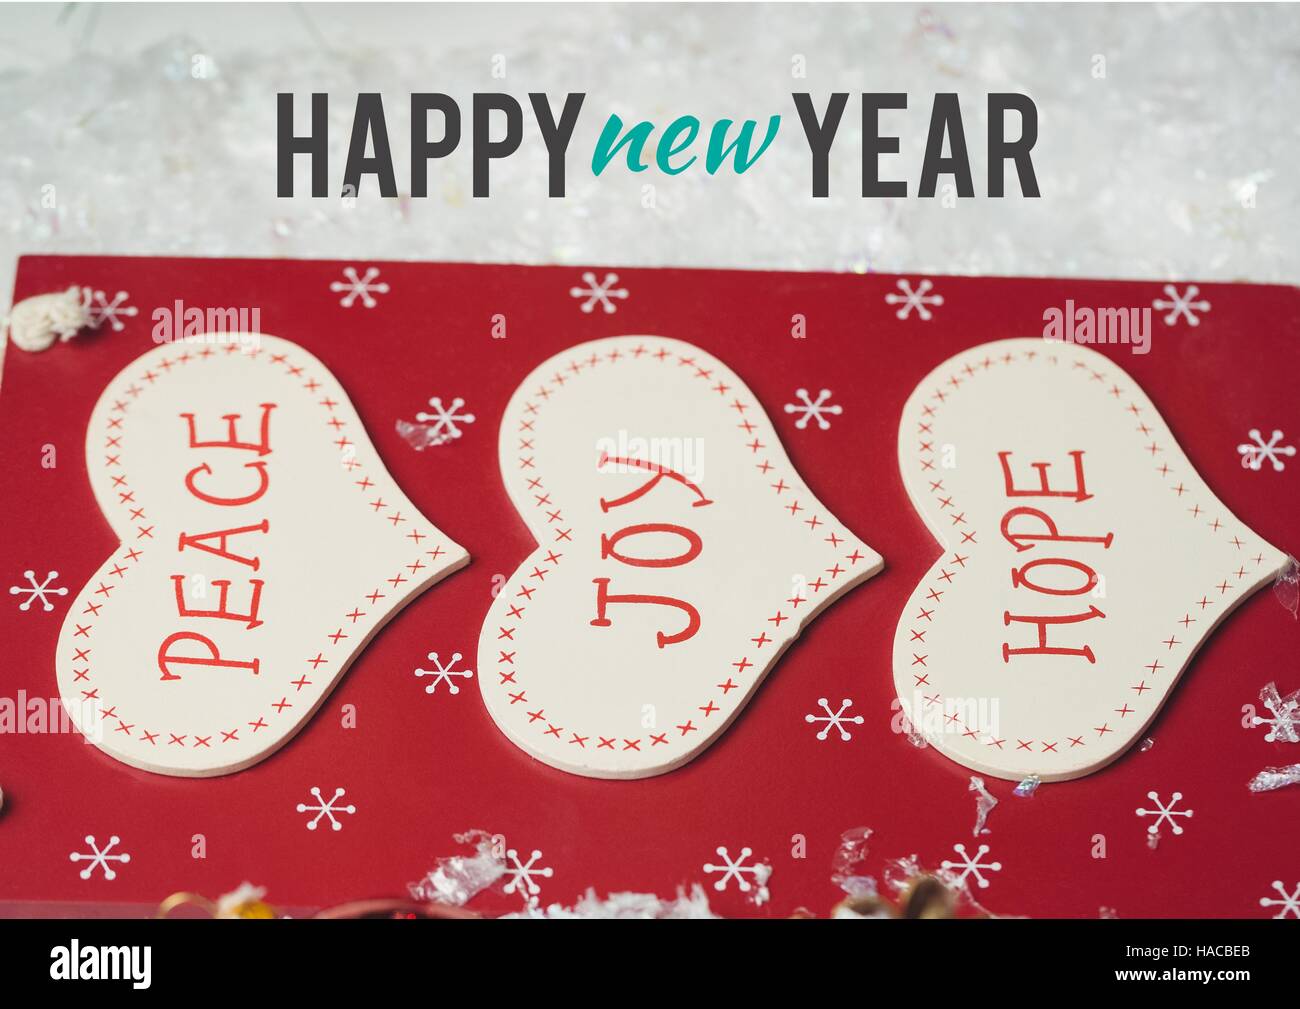 Happy new year wishes with message of peace, joy and hope Stock Photo